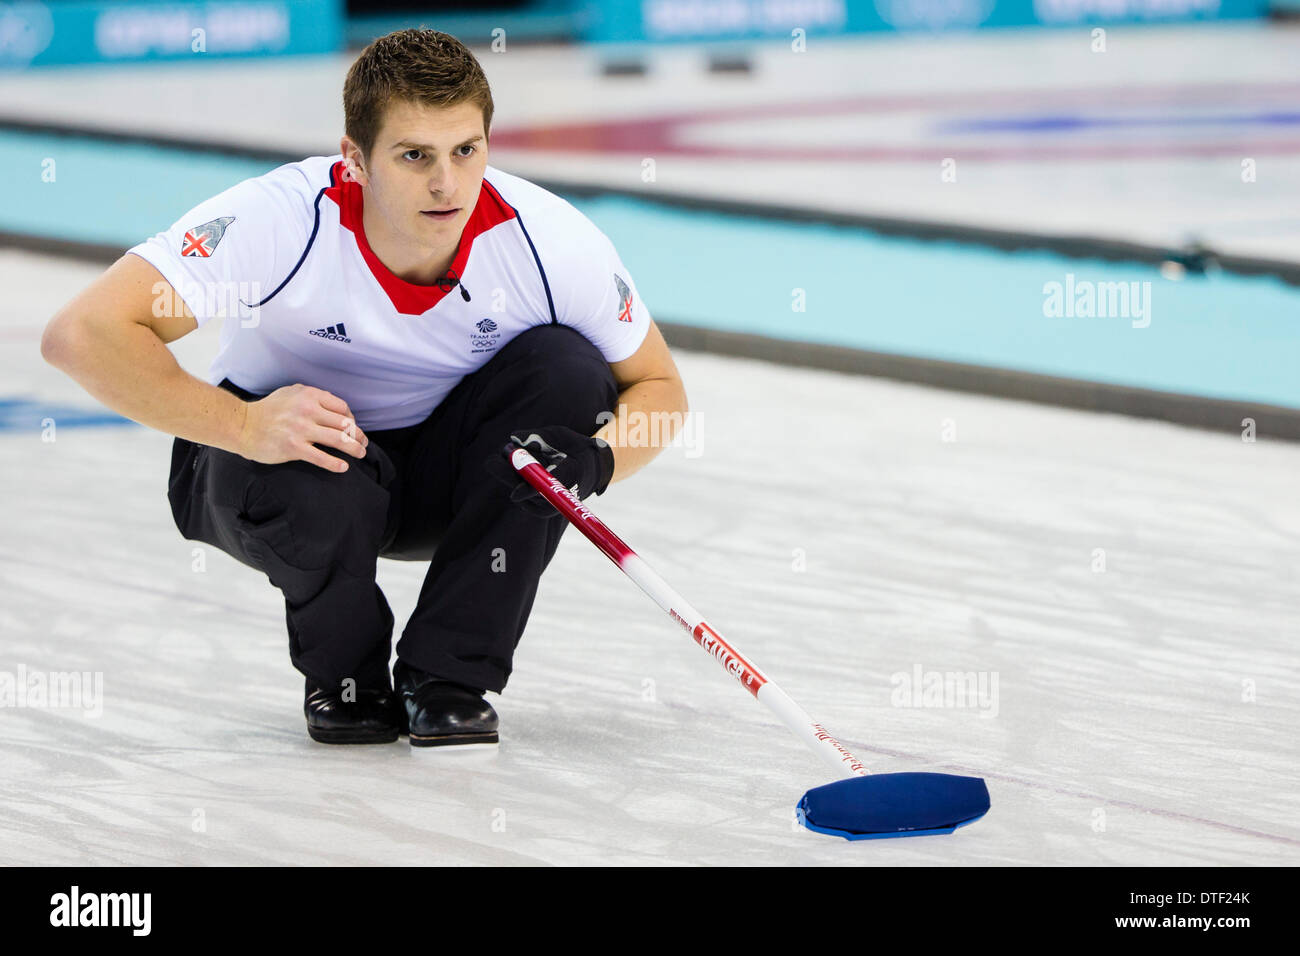 Sochi, Krasnodar Krai, Russia. 17th Feb, 2014. Scott ANDREWS (GBR) during Session 12 of the Round Robin stage of the Men's Curling competition in a match between Great Britain and China, from the Ice Cube Curling Center, Coastal Cluster - XXII Olympic Winter Games Credit:  Action Plus Sports/Alamy Live News Stock Photo